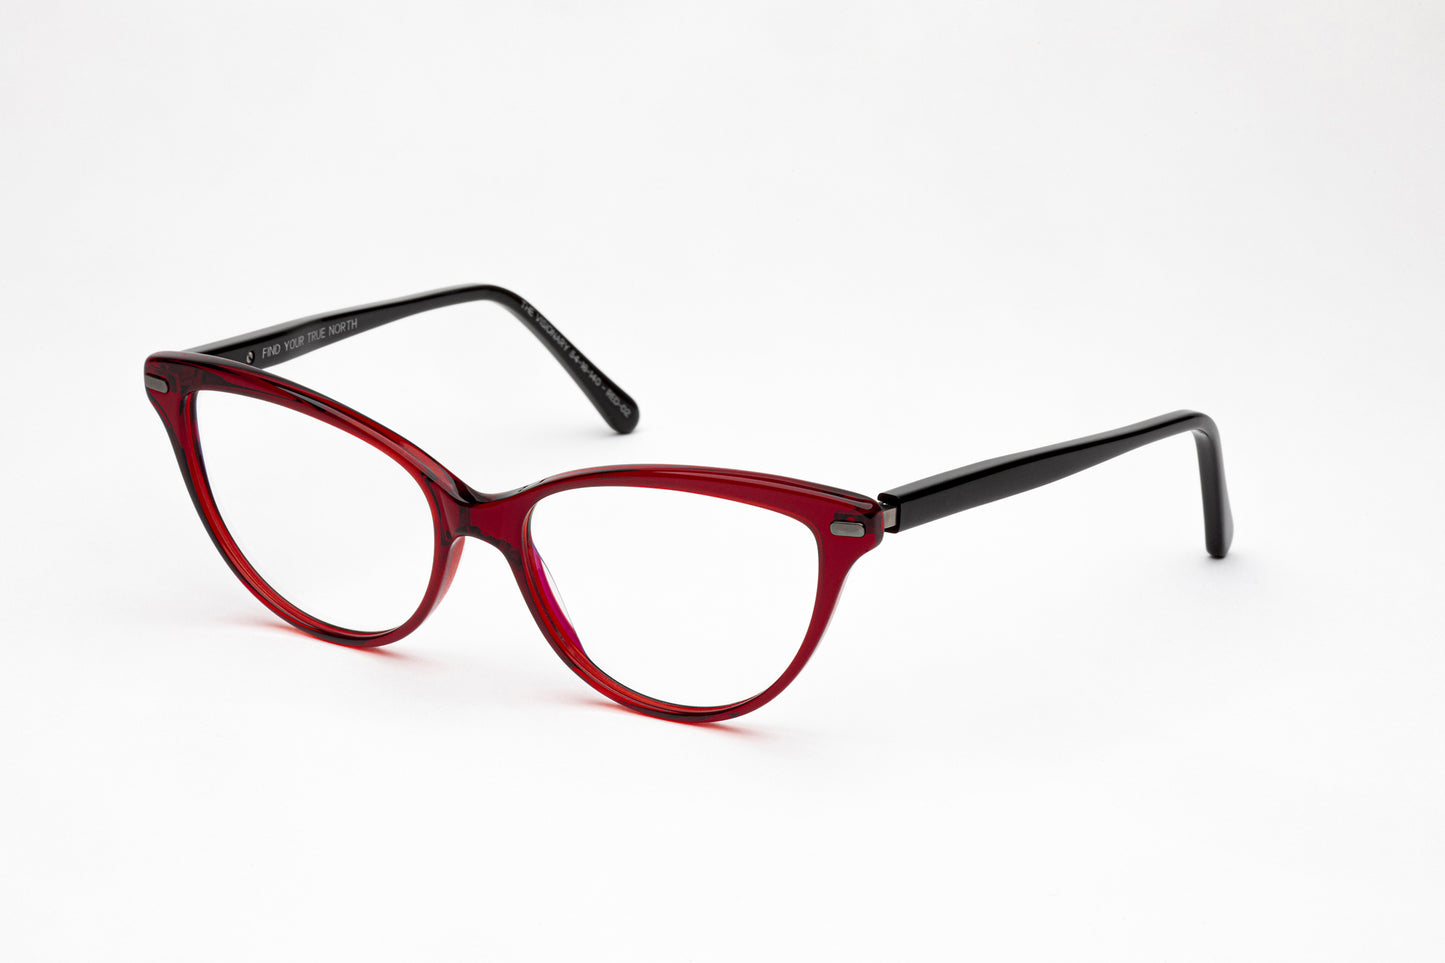 Angled View - The Visionary | Red Cateye Acetate Frames – Red Cat-Eye Glasses 